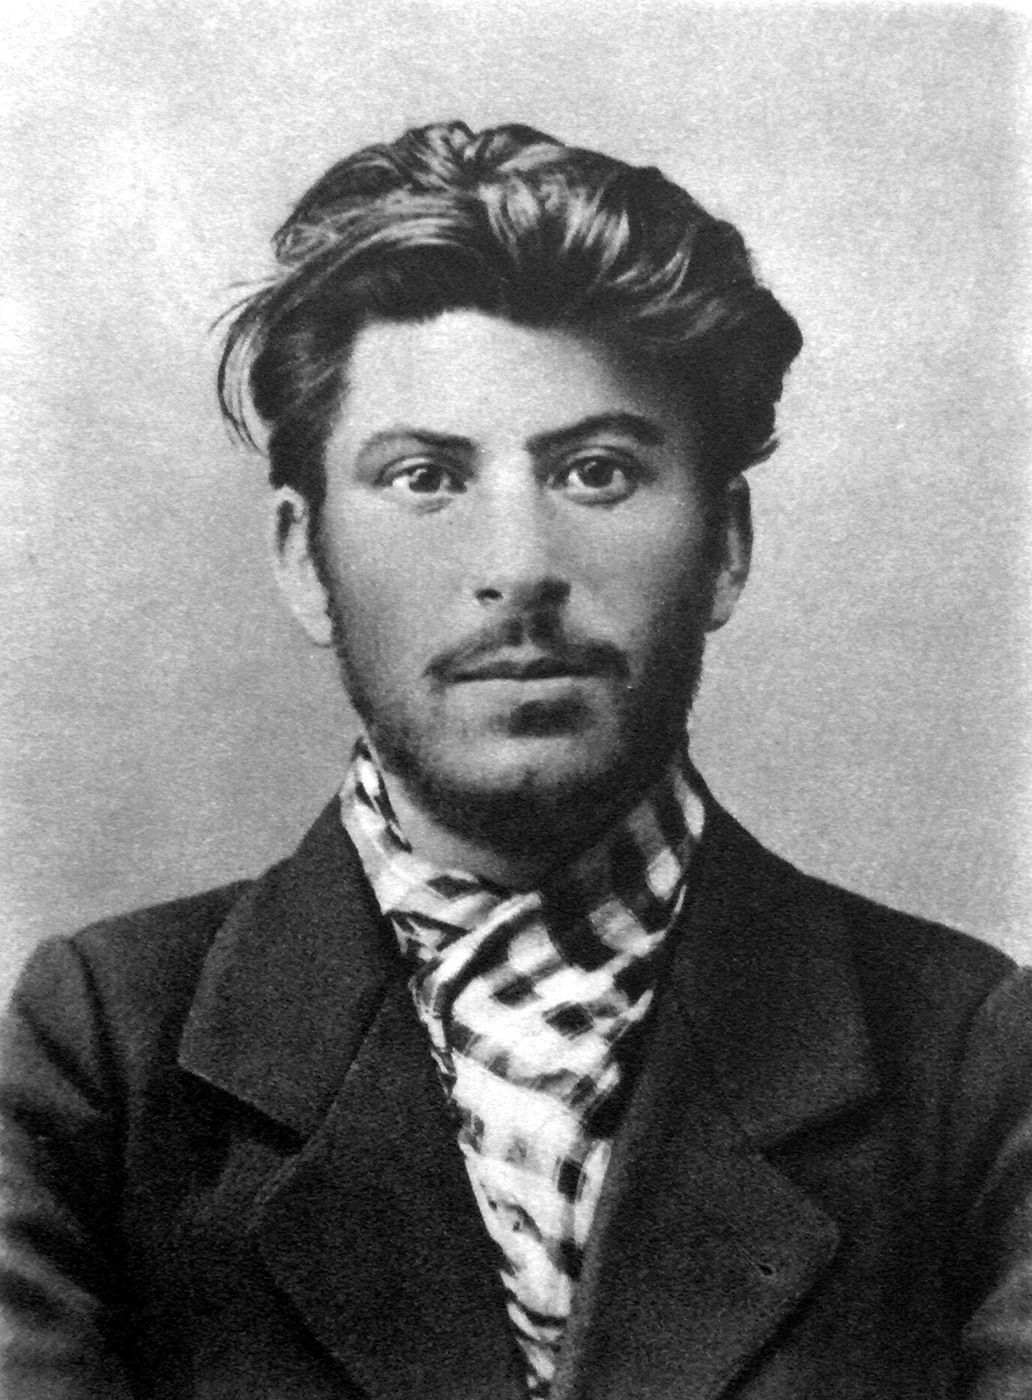 Young and Handsome Stalin?